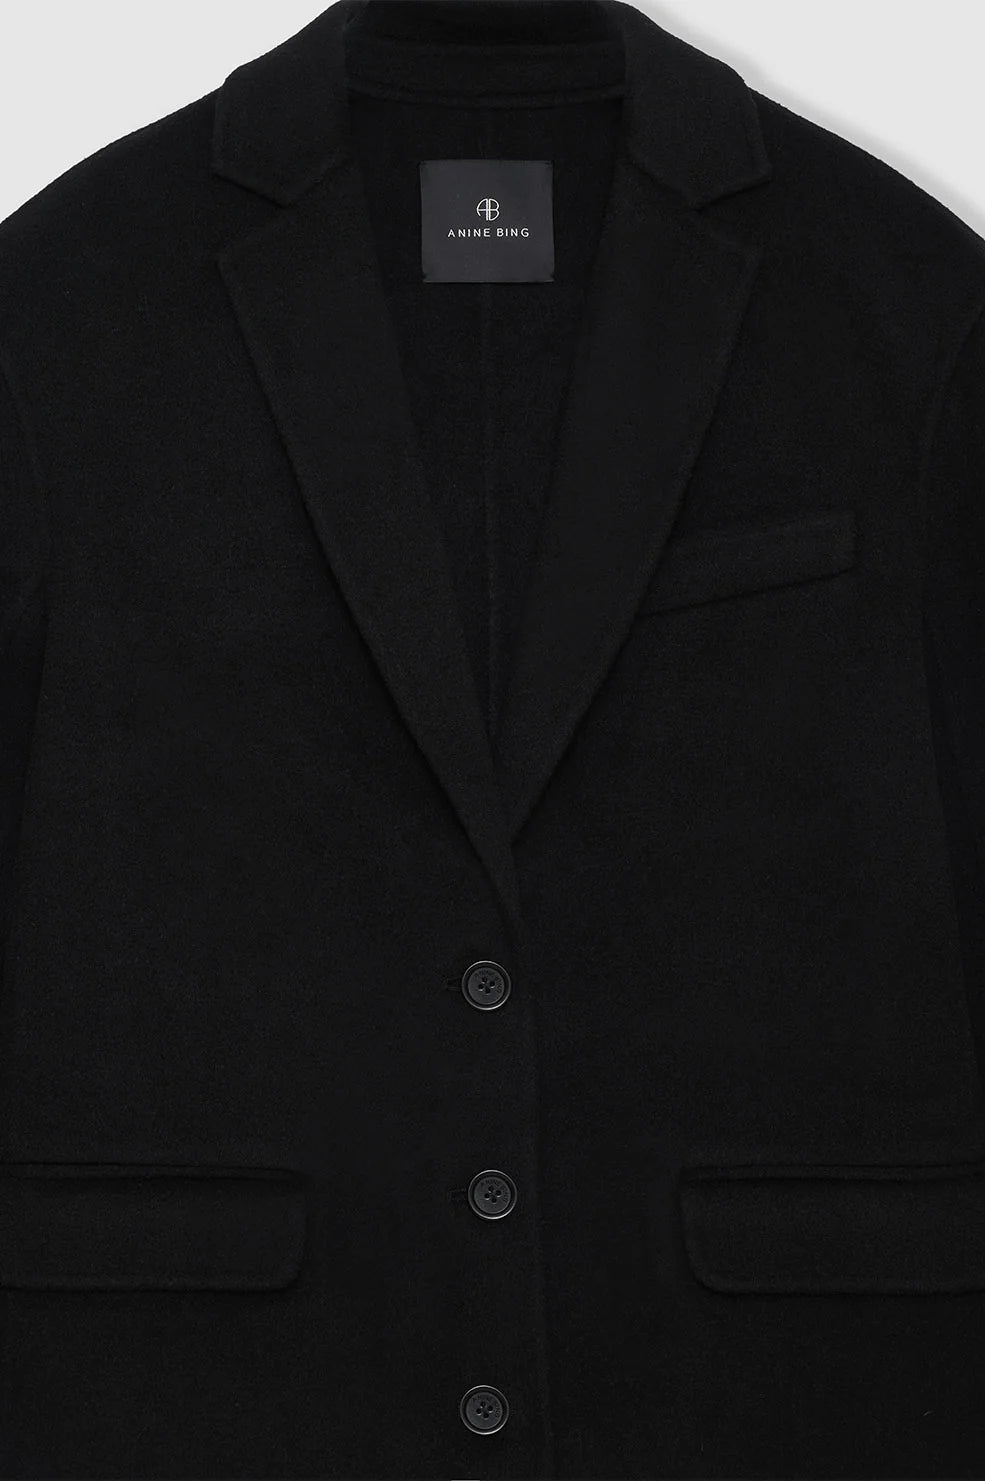 Quinn Coat in Black Cashmere Blend by Anine Bing